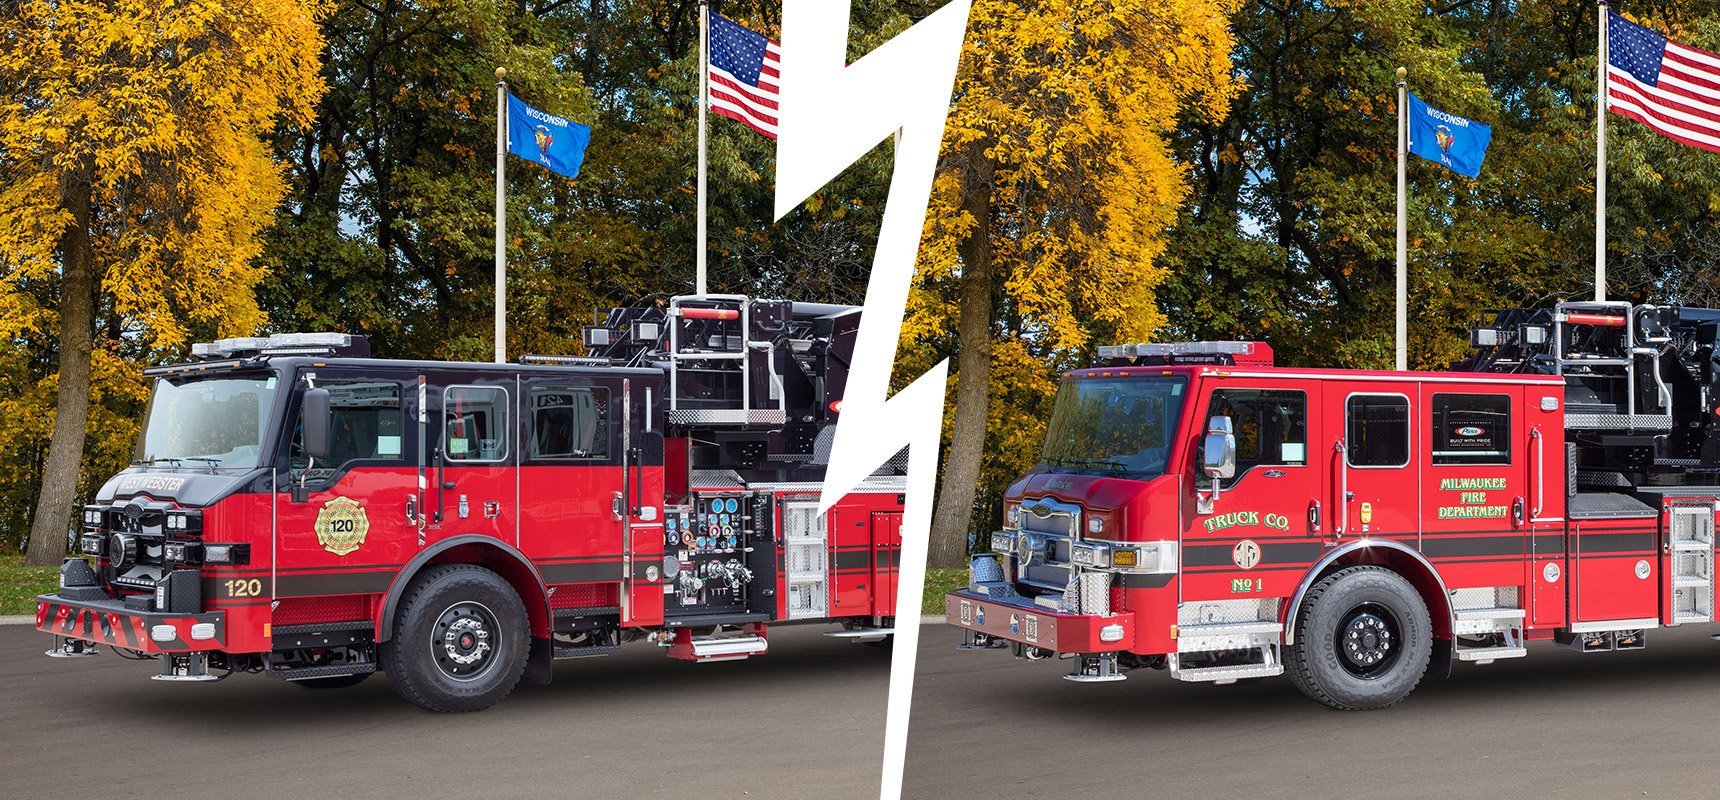 A side by side image shows two red and black aerial fire trucks parked with flags in the background, one with a pump and tank and one with no pump and no tank. 